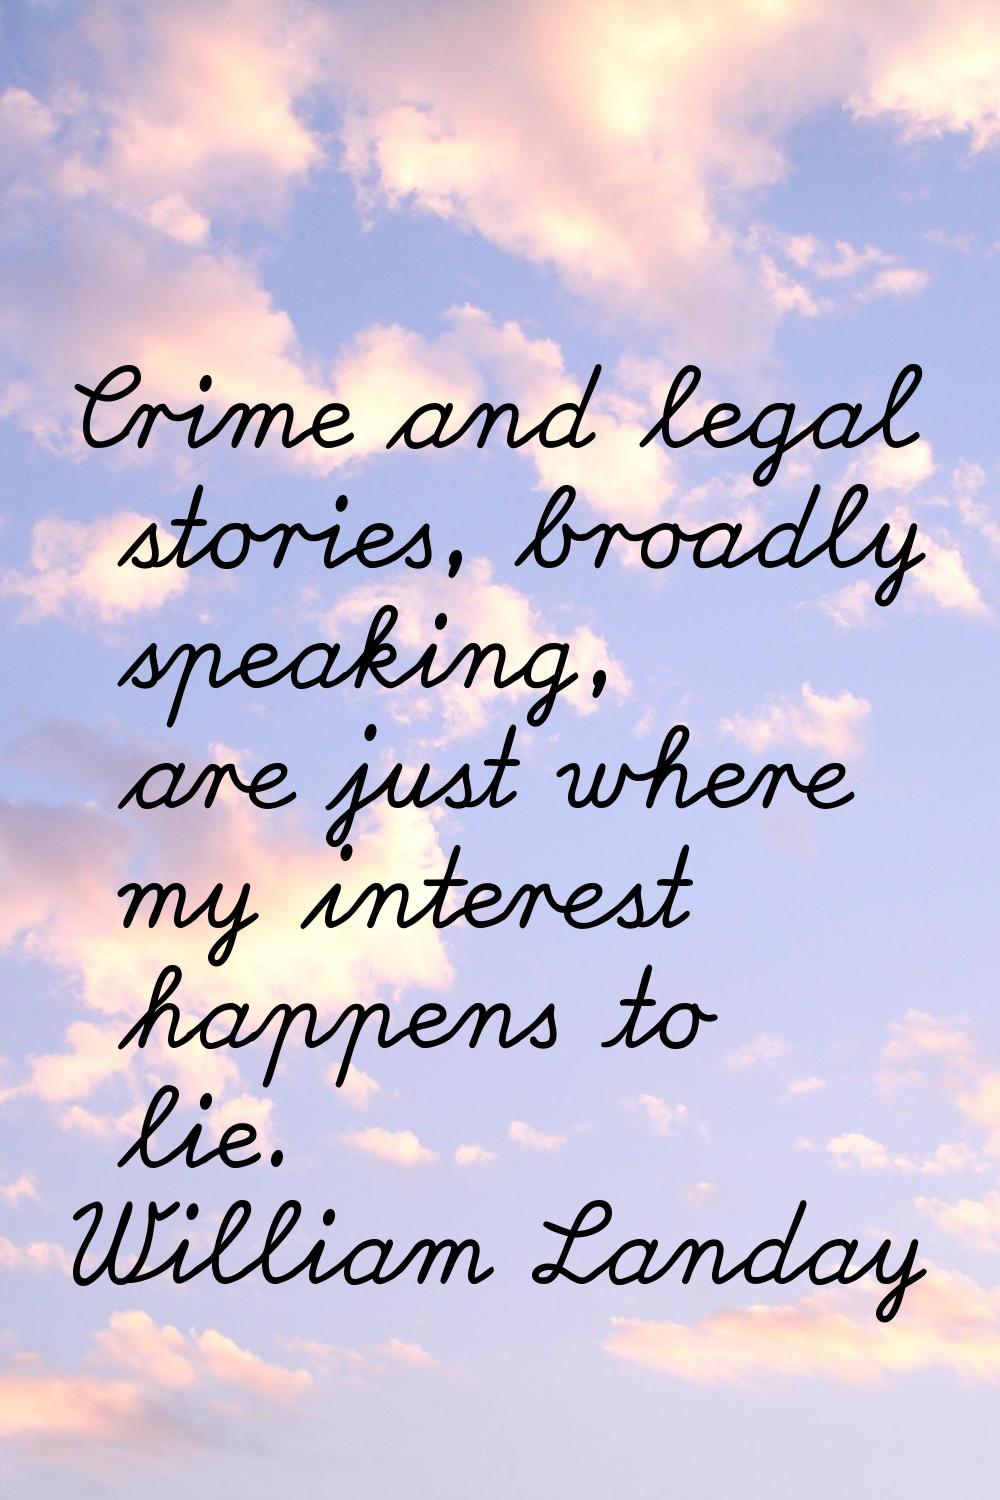 Crime and legal stories, broadly speaking, are just where my interest happens to lie.